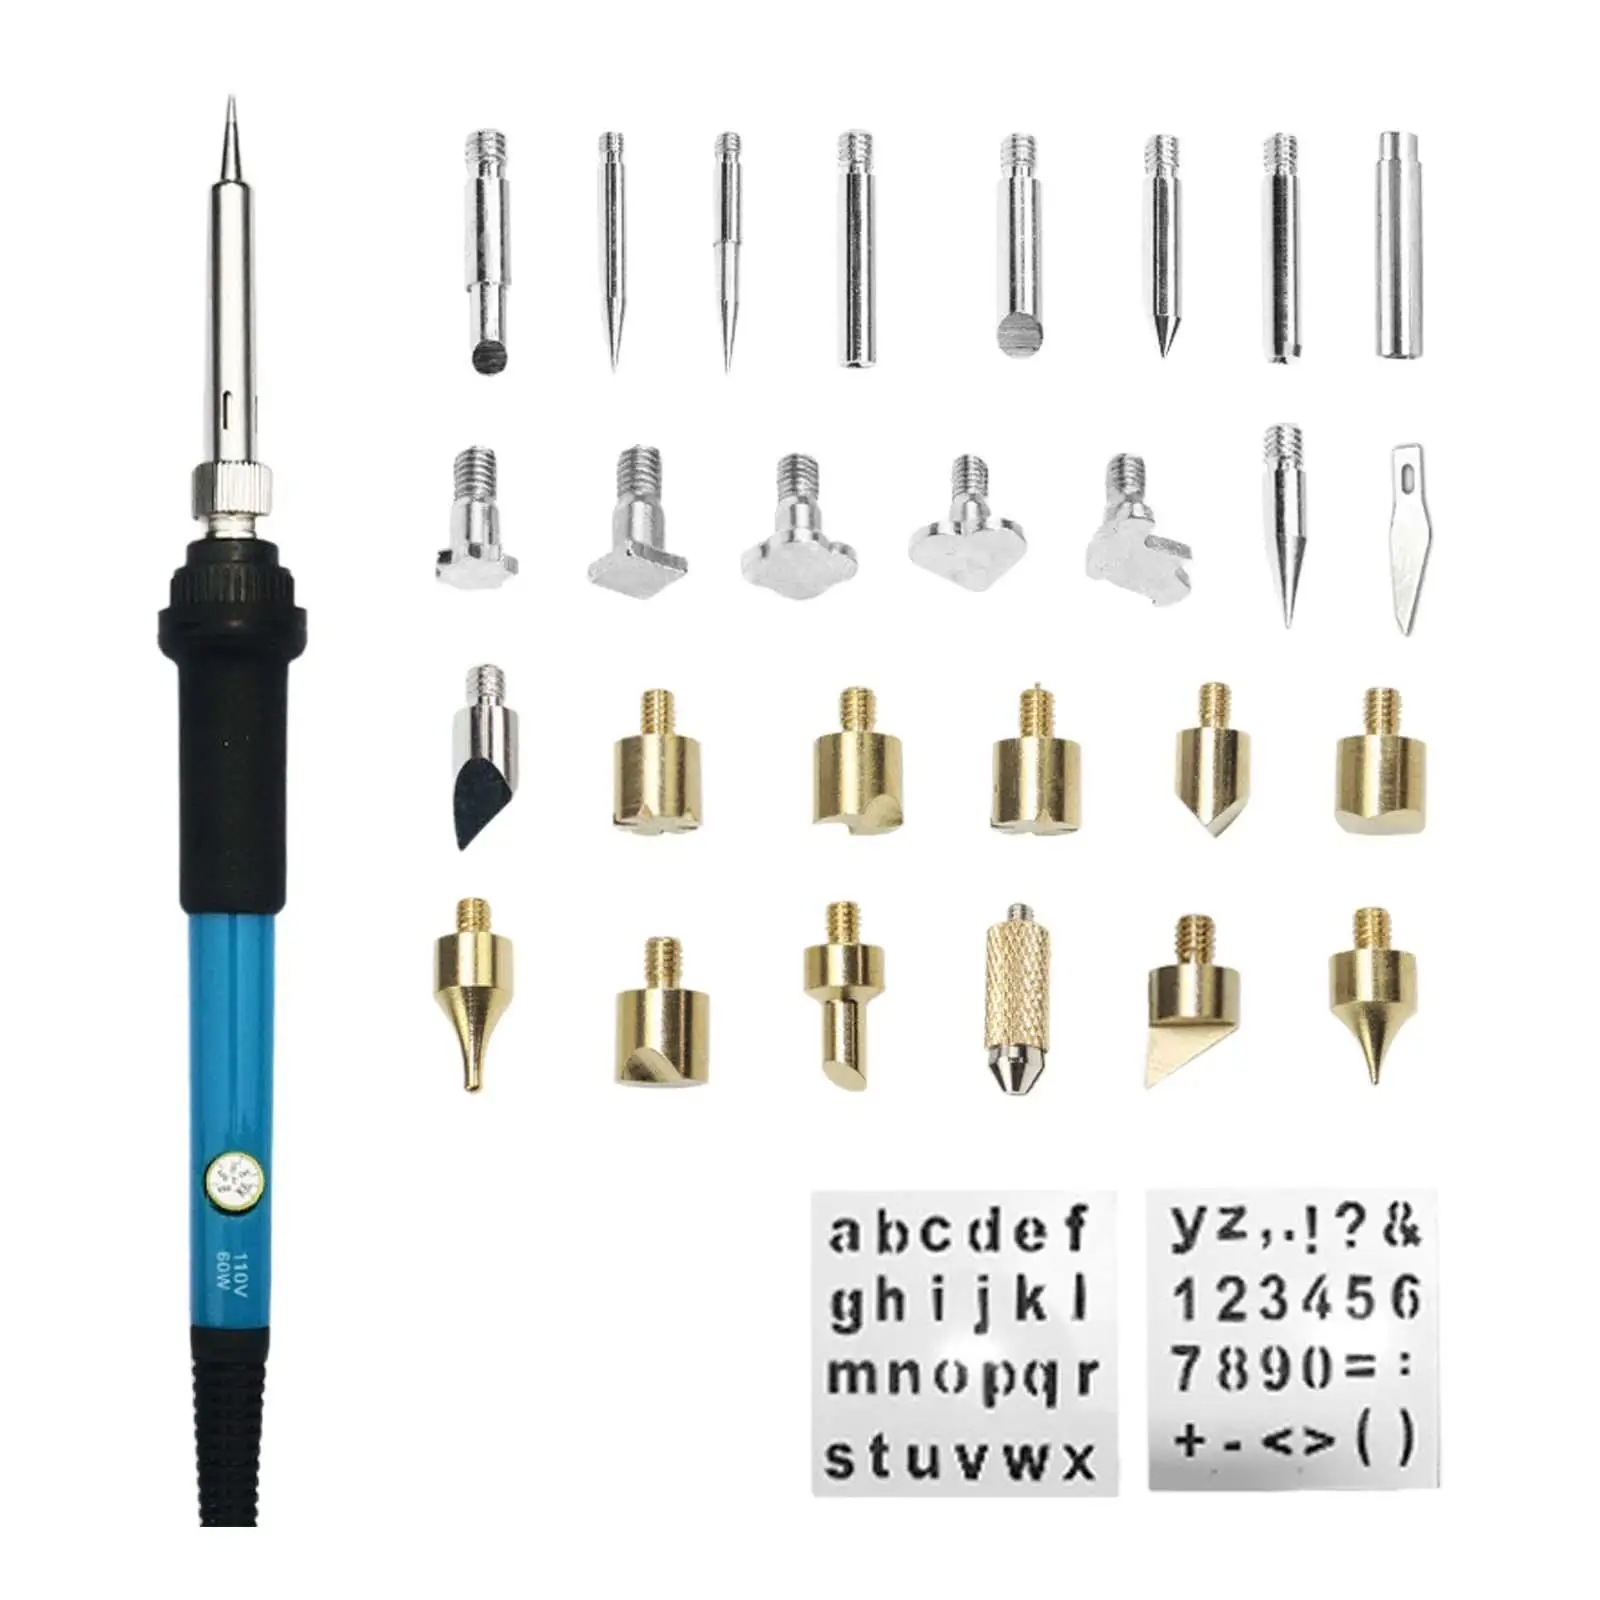 30 Pieces Solder Iron Tool Portable Electronic Product Welding Digital Display Professional Welding Repair Tool Soldering Iron